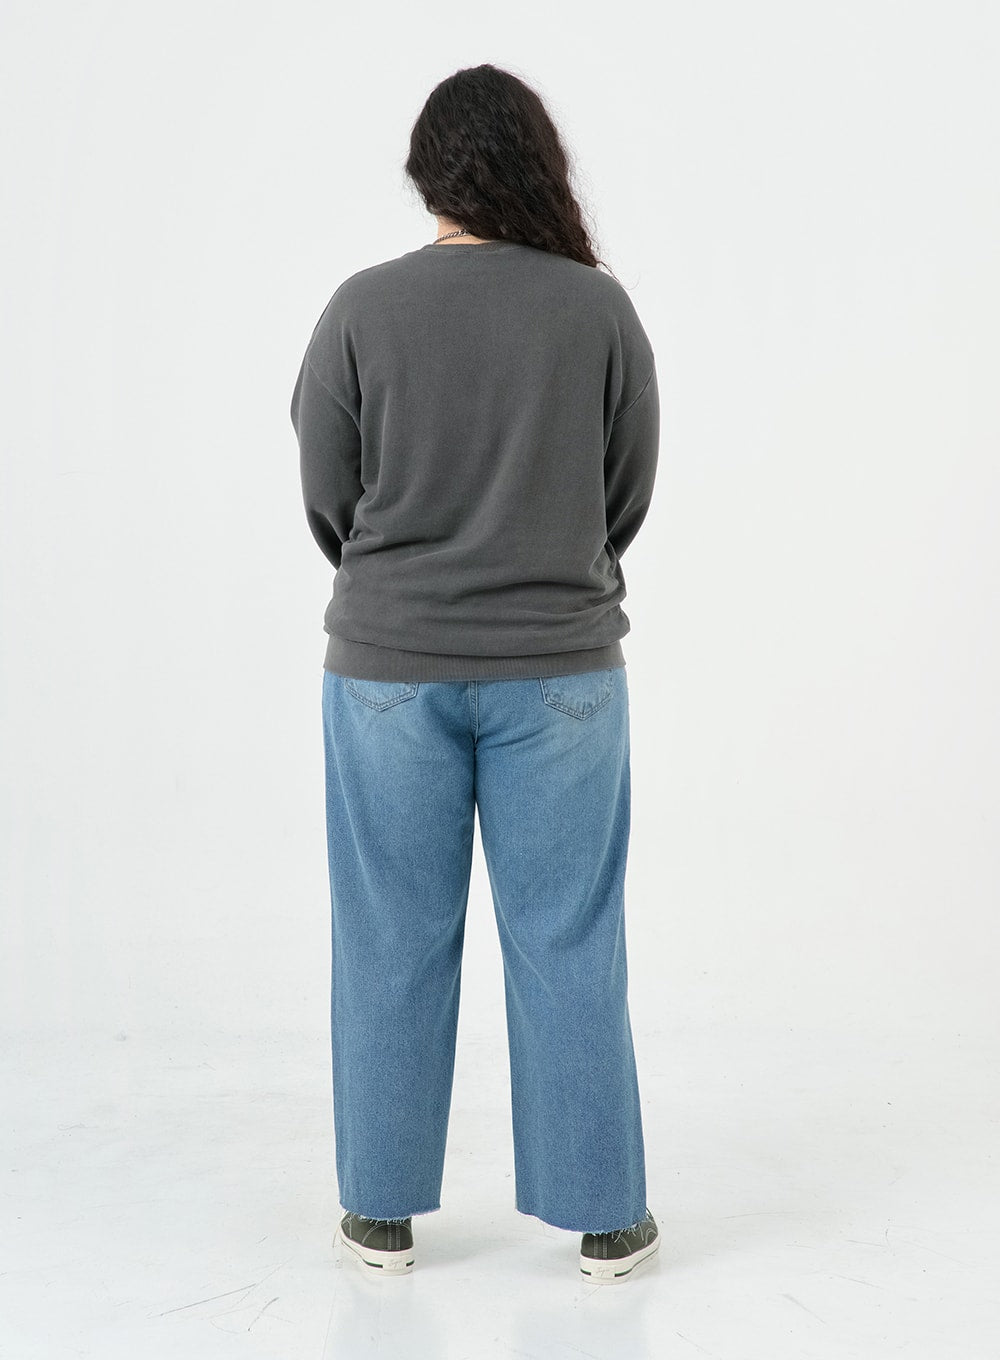 Plus Cotton And Denim Back Bending Wide Pants IS02